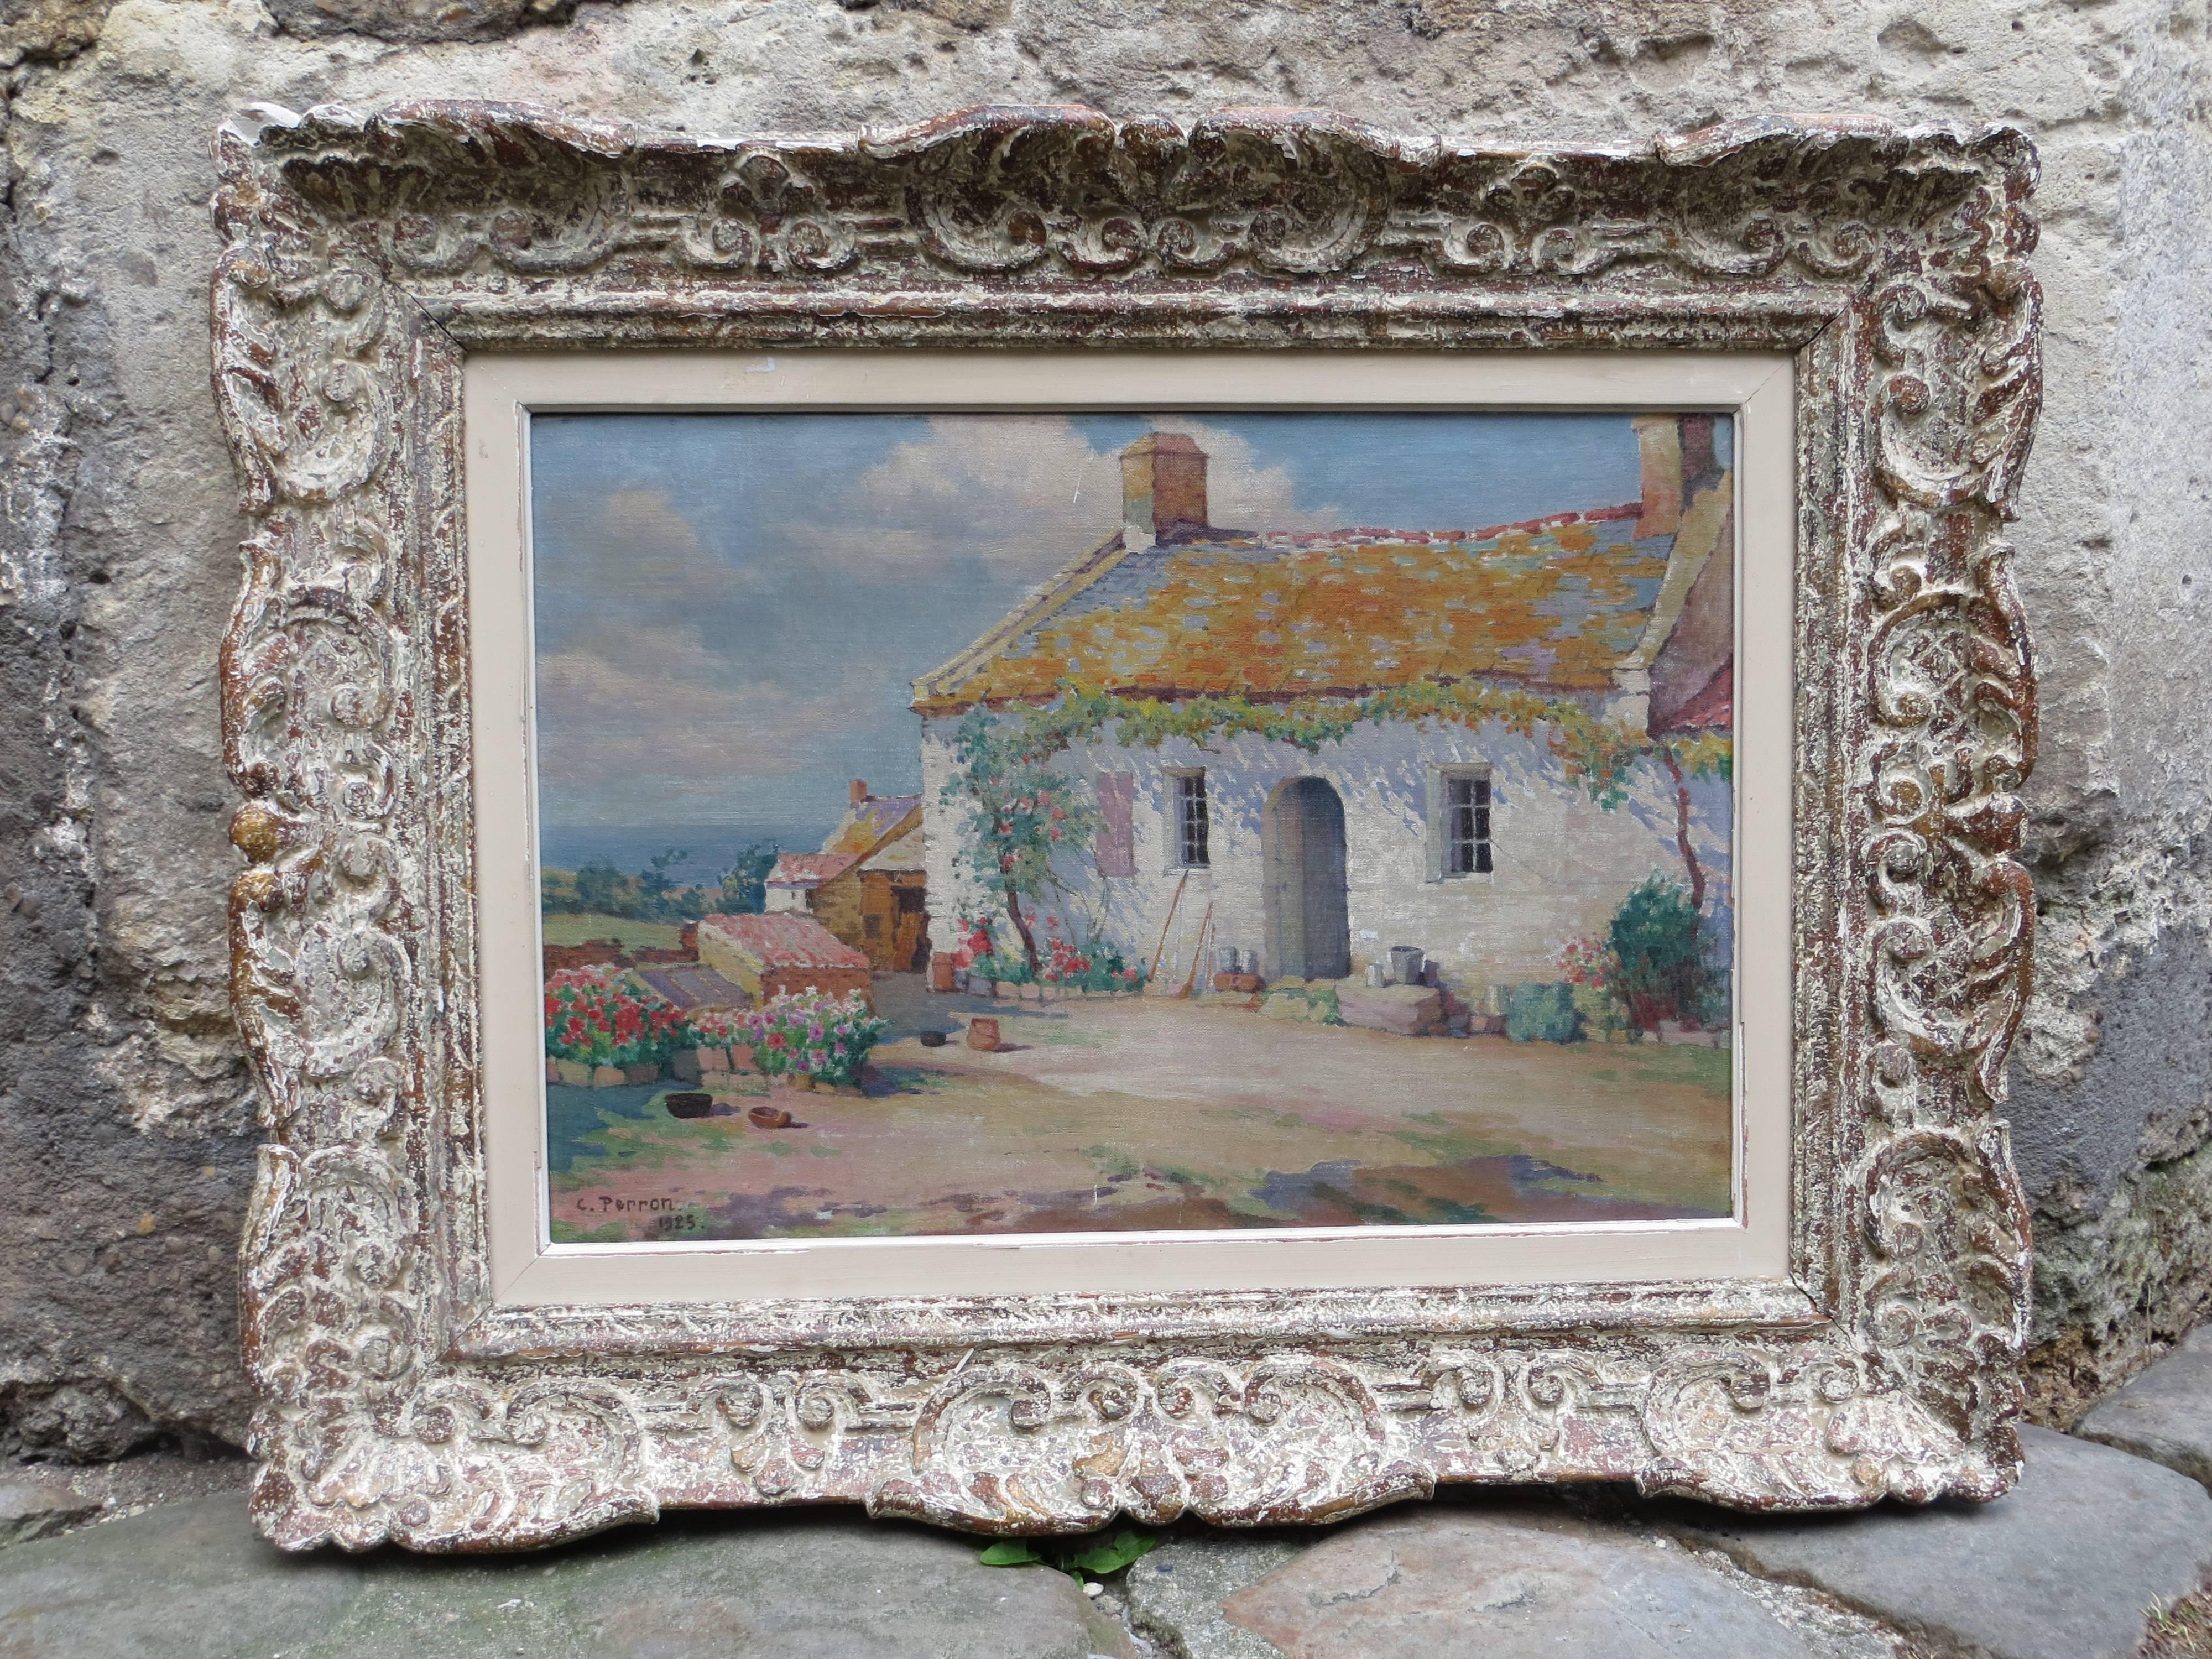 C. PERRON House of the ILE d'YEU - Painting by Charles Theodore Perron